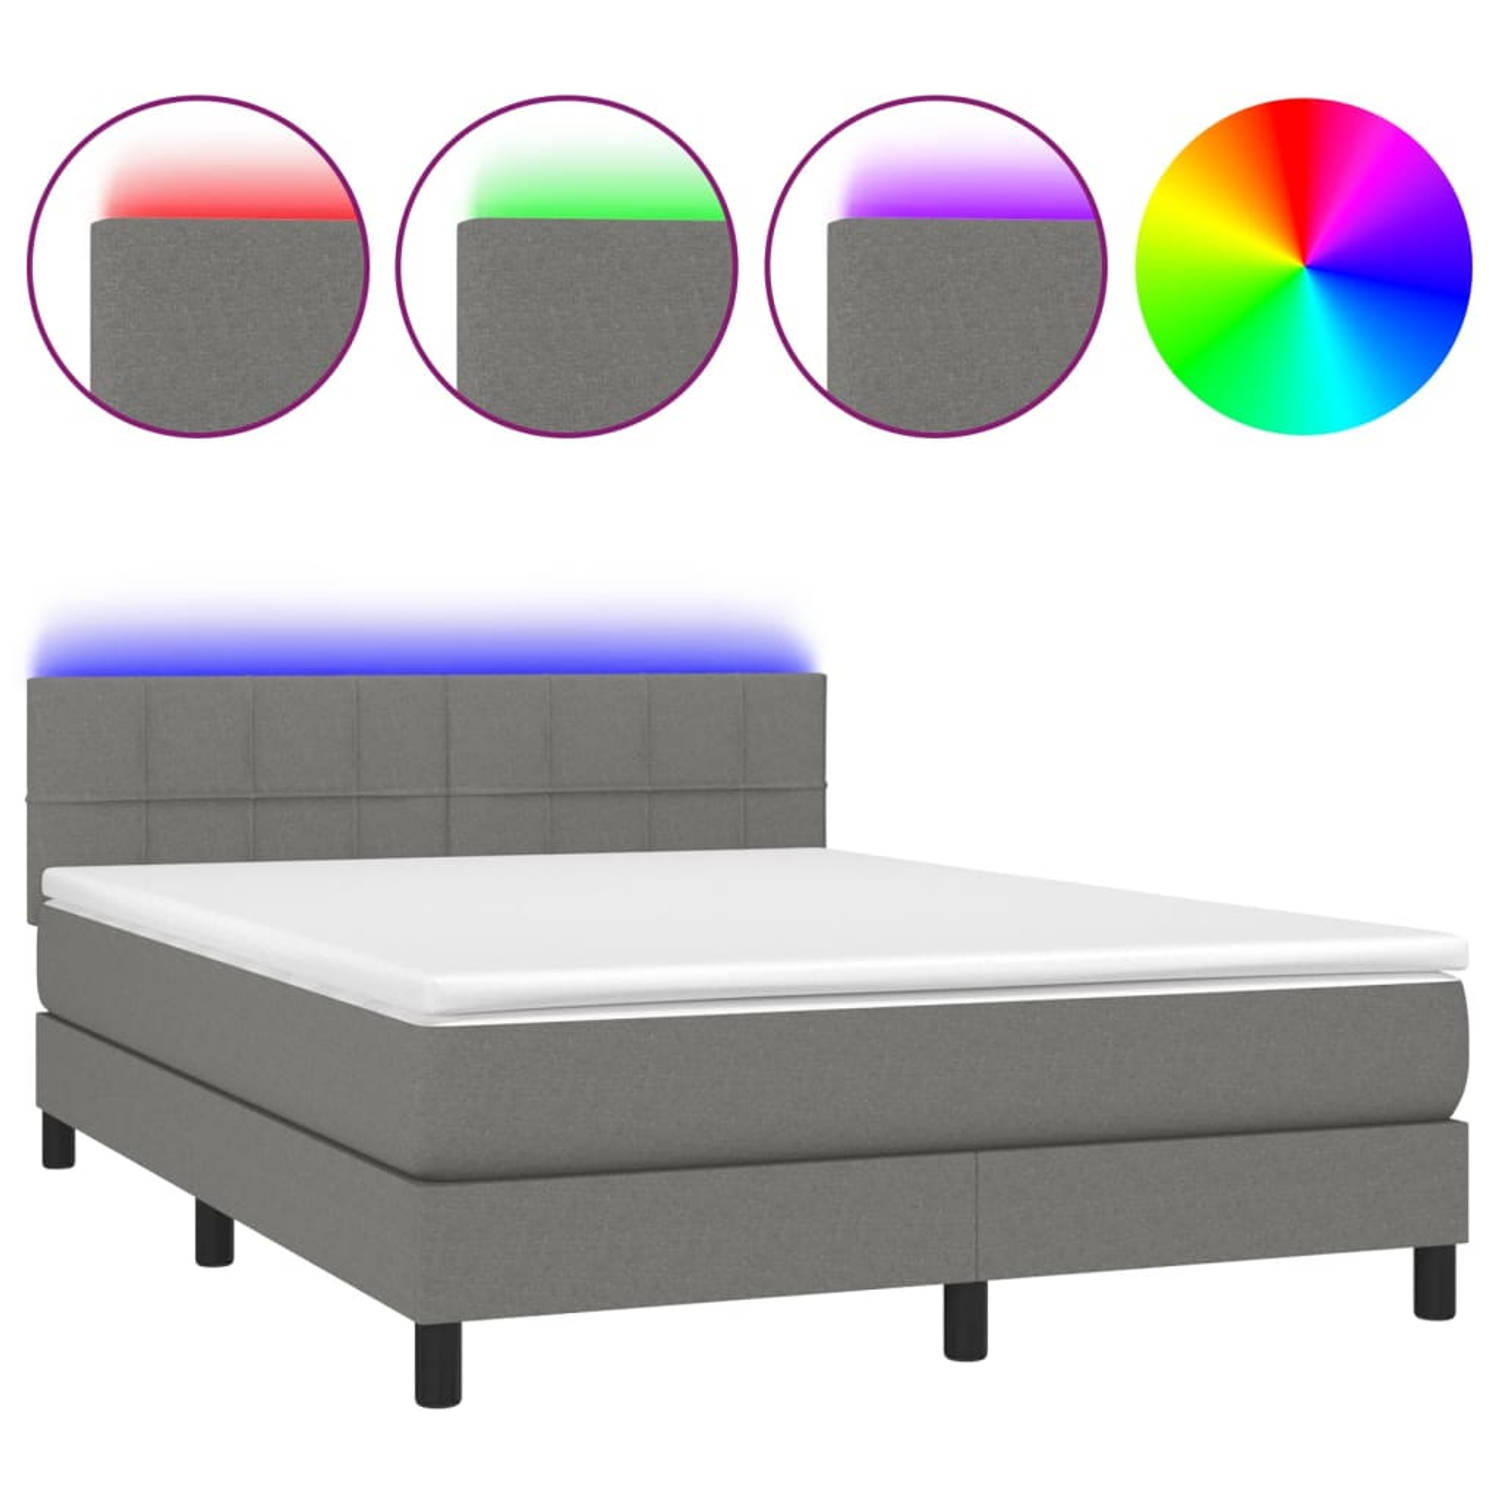 The Living Store Bed Boxspring - Donkergrijs - 203x144x78/88 cm - LED verlichting